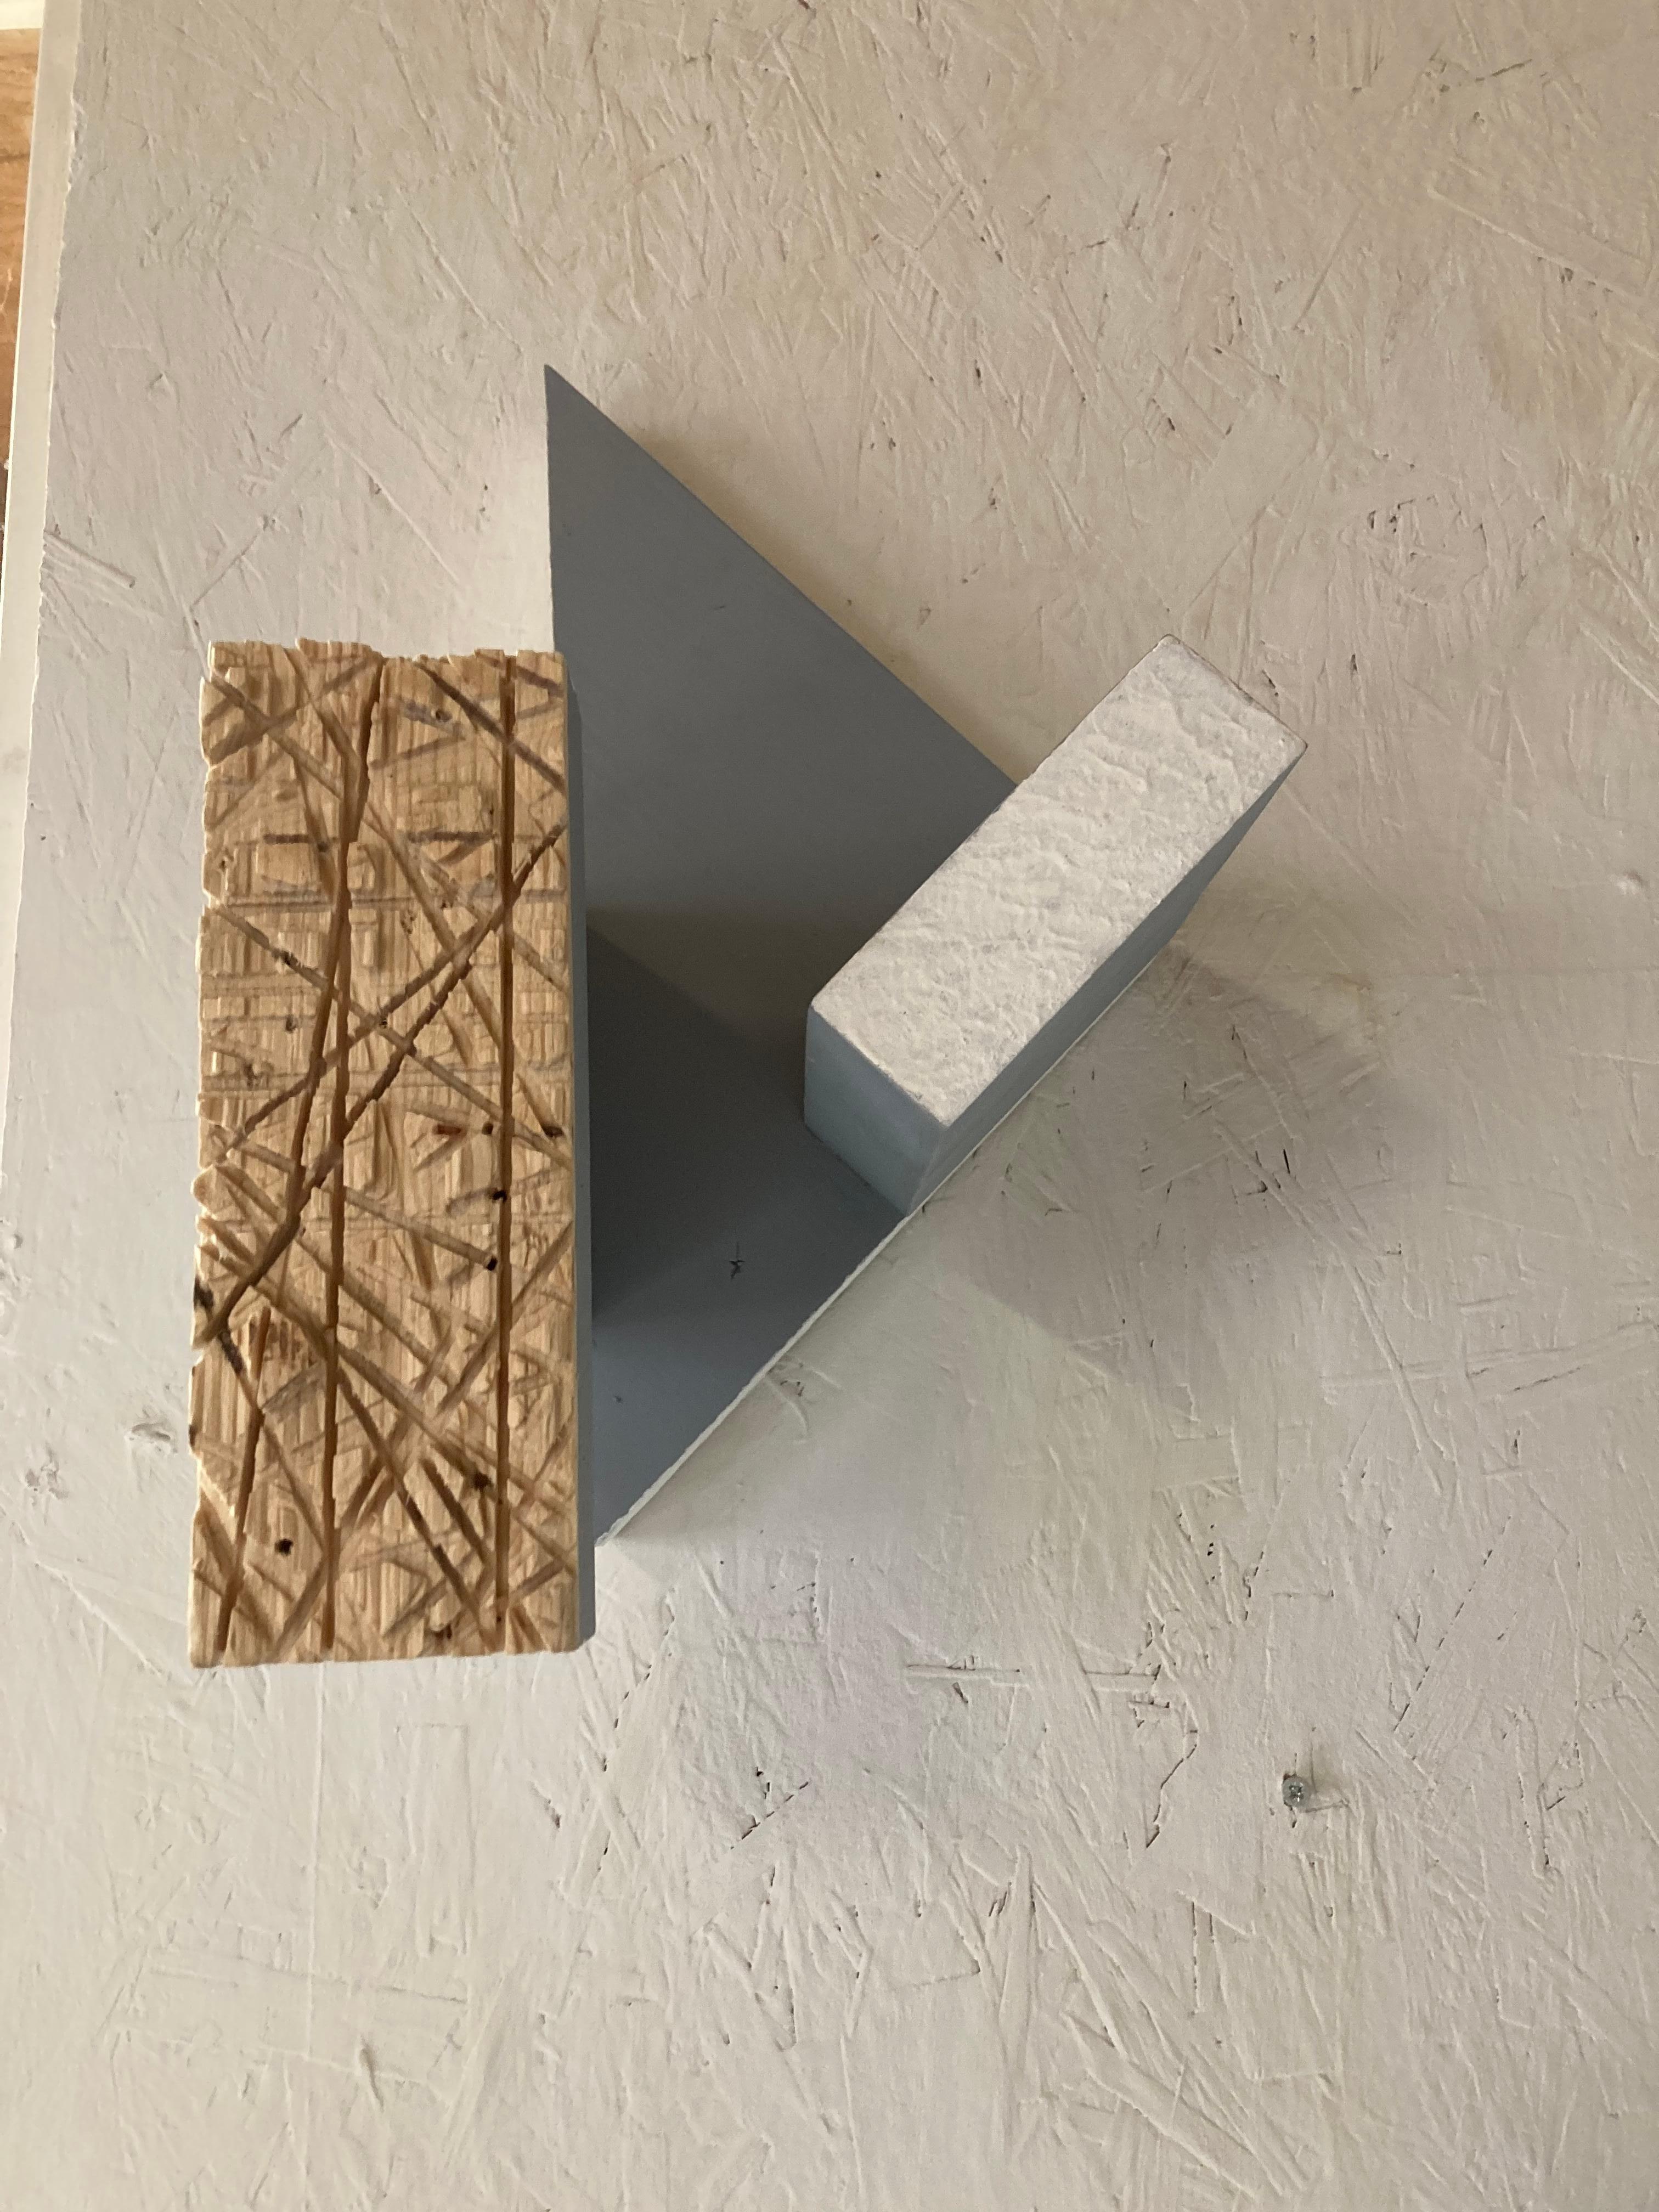 Dutch Contemporary Art Harm De Veer Abstract Wood Sculpture Just Hanging There 1 Grey  For Sale